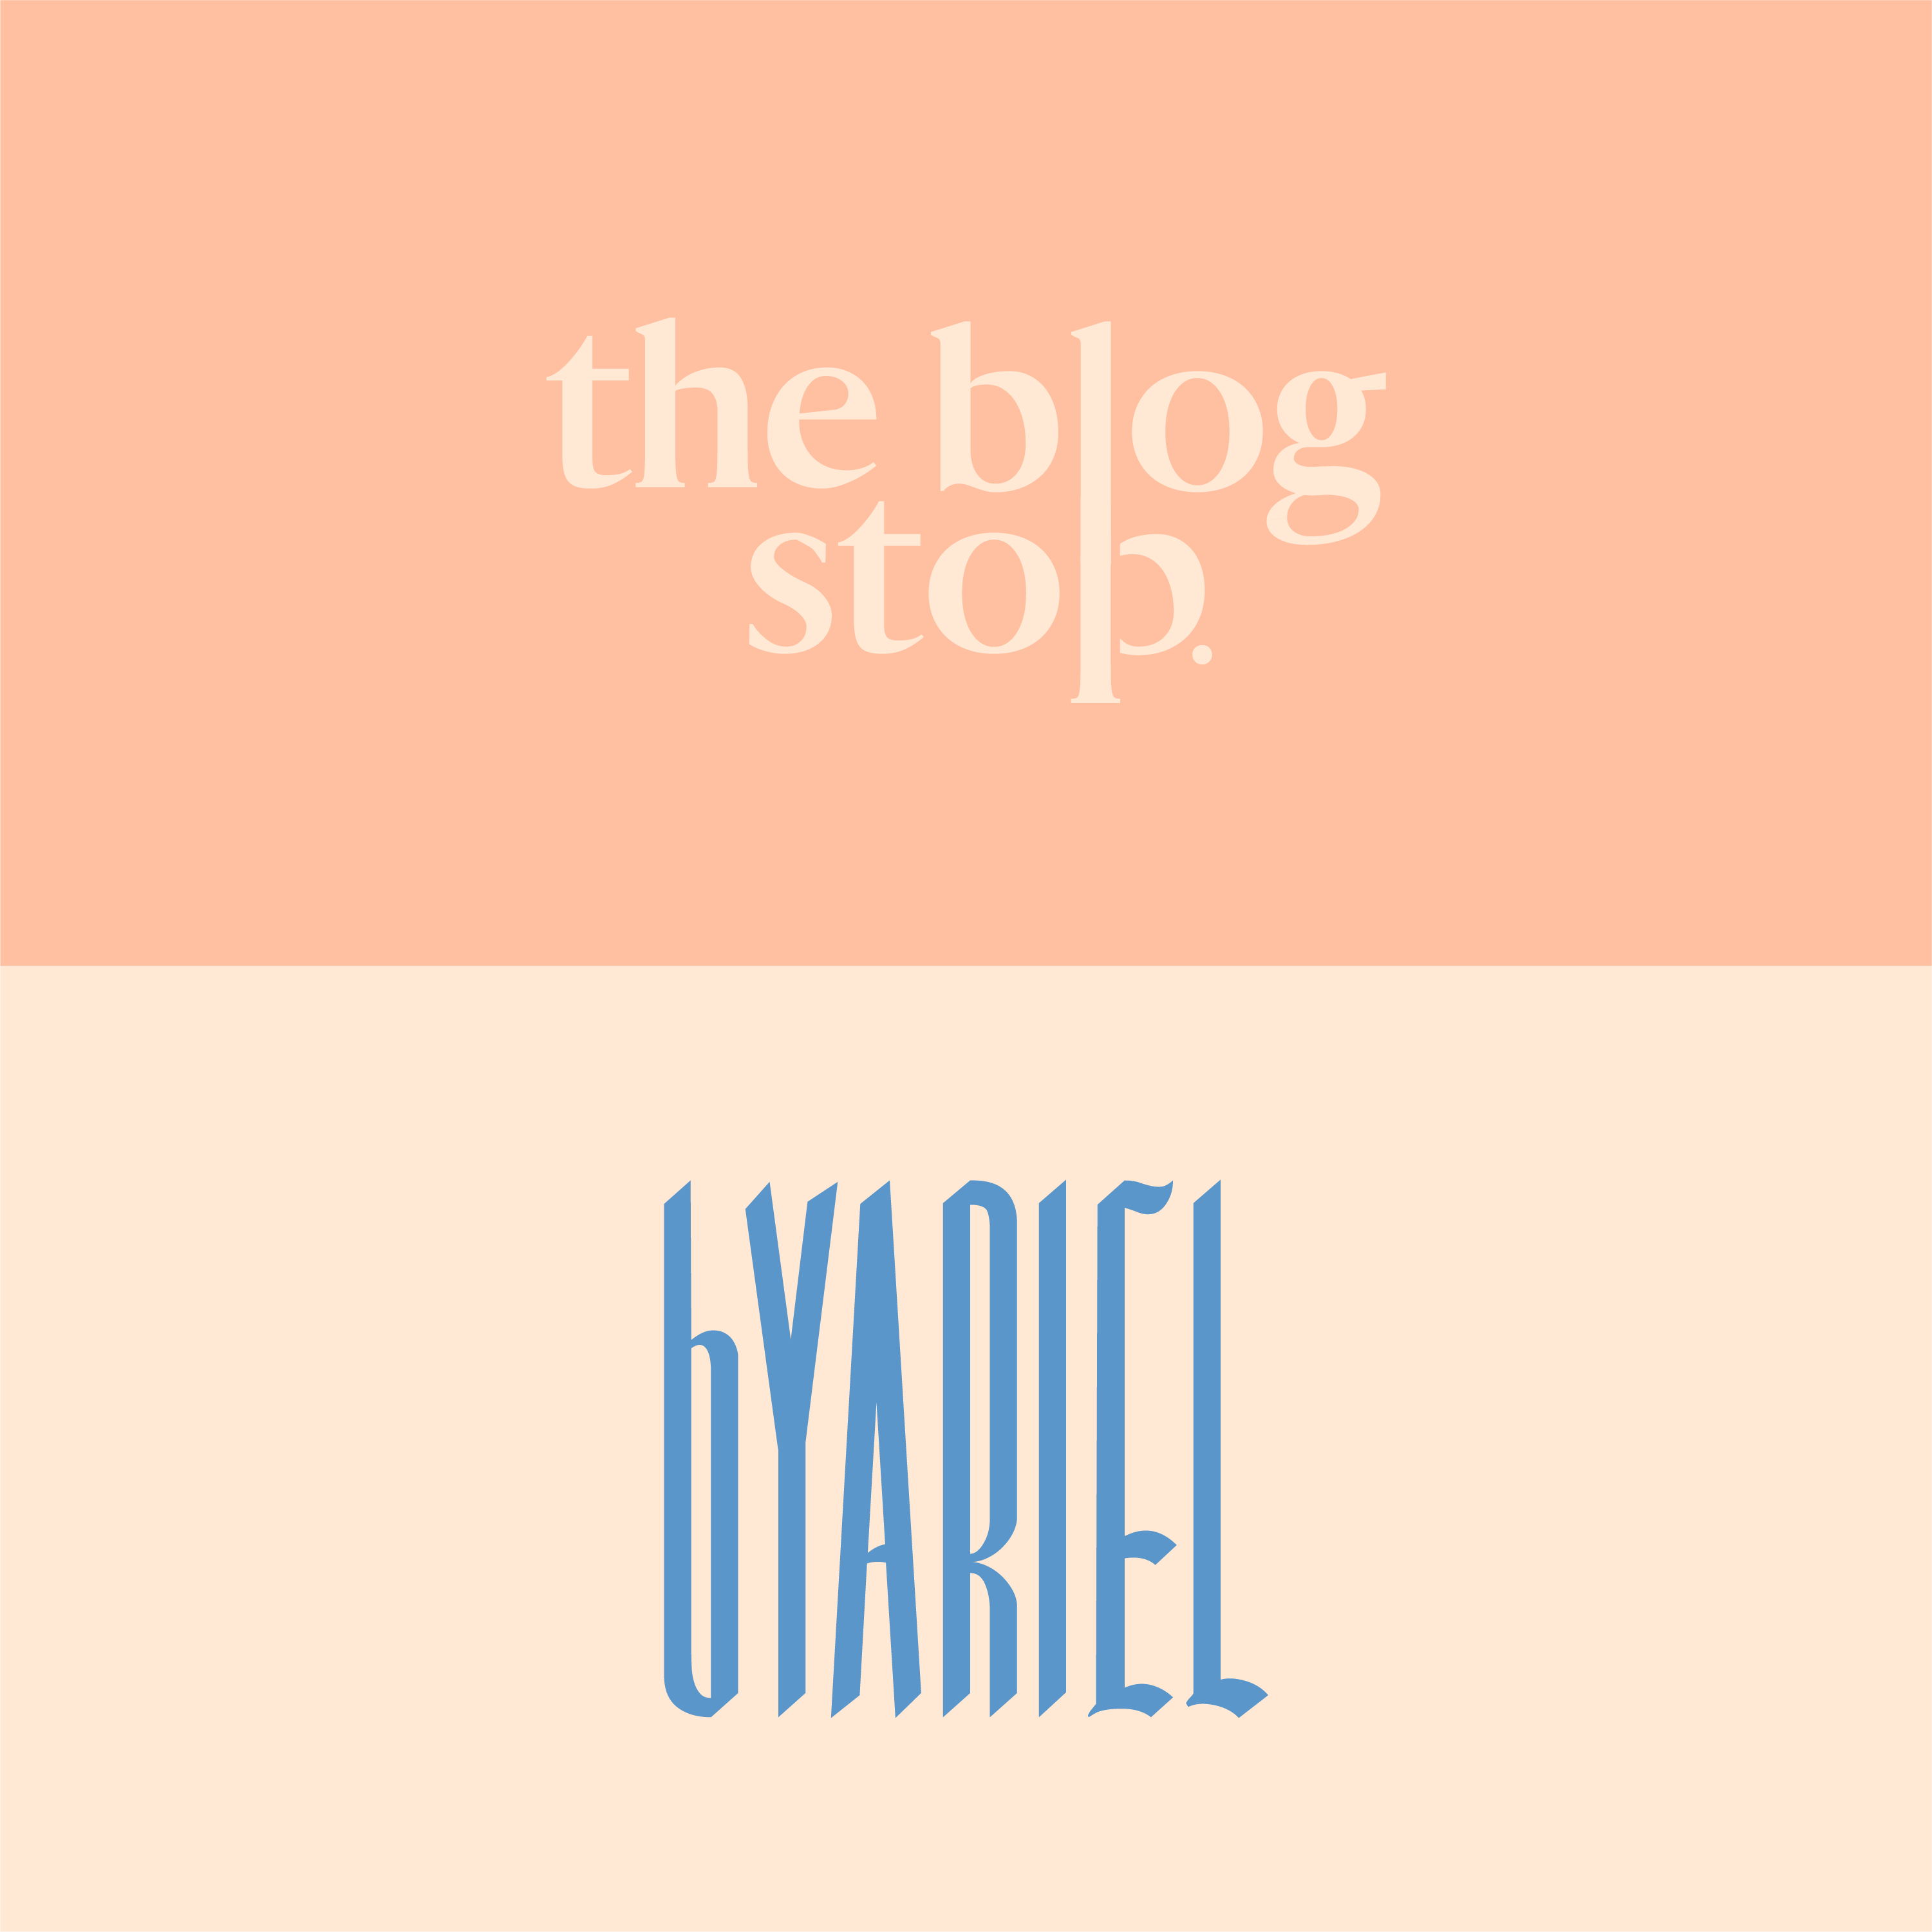 Branding your own creative business, how to brand your own creative business, The Blog Stop rebrand, ByAriel rebrand